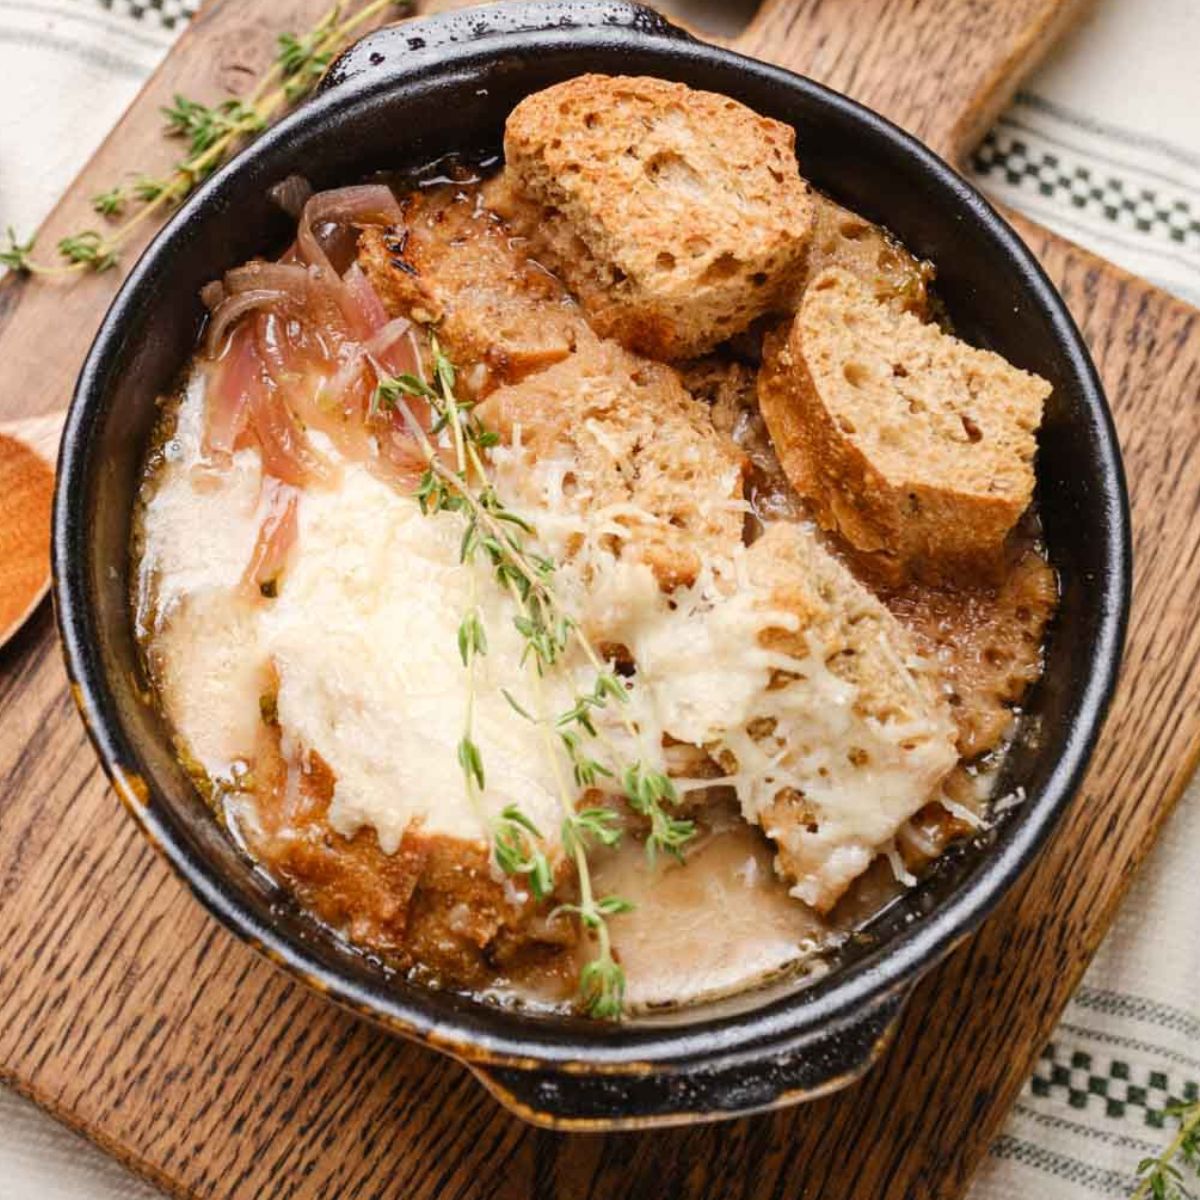 Vegan French Onion Soup in a bowl.